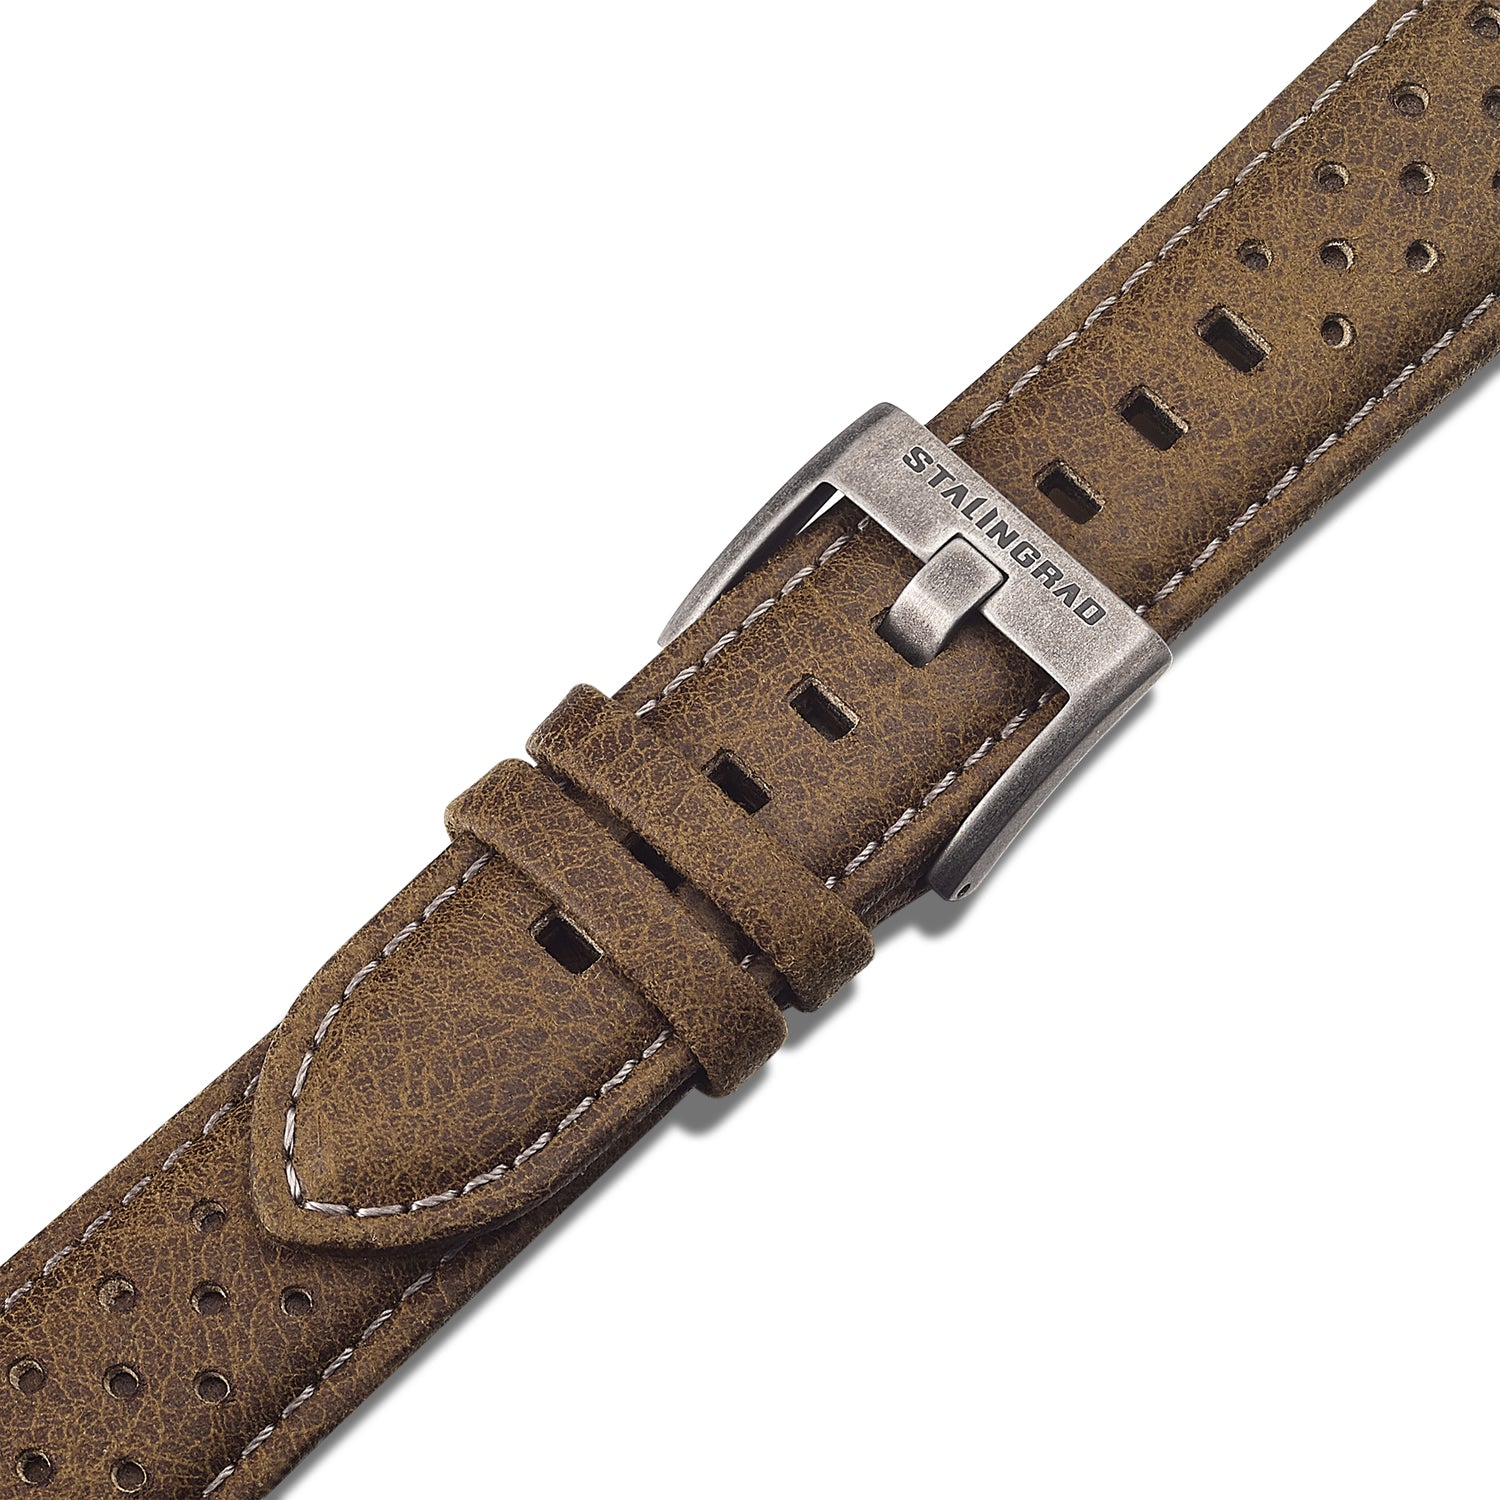 Stalingrad Red Army watch Strap brown leather with a silver buckle on a white background.